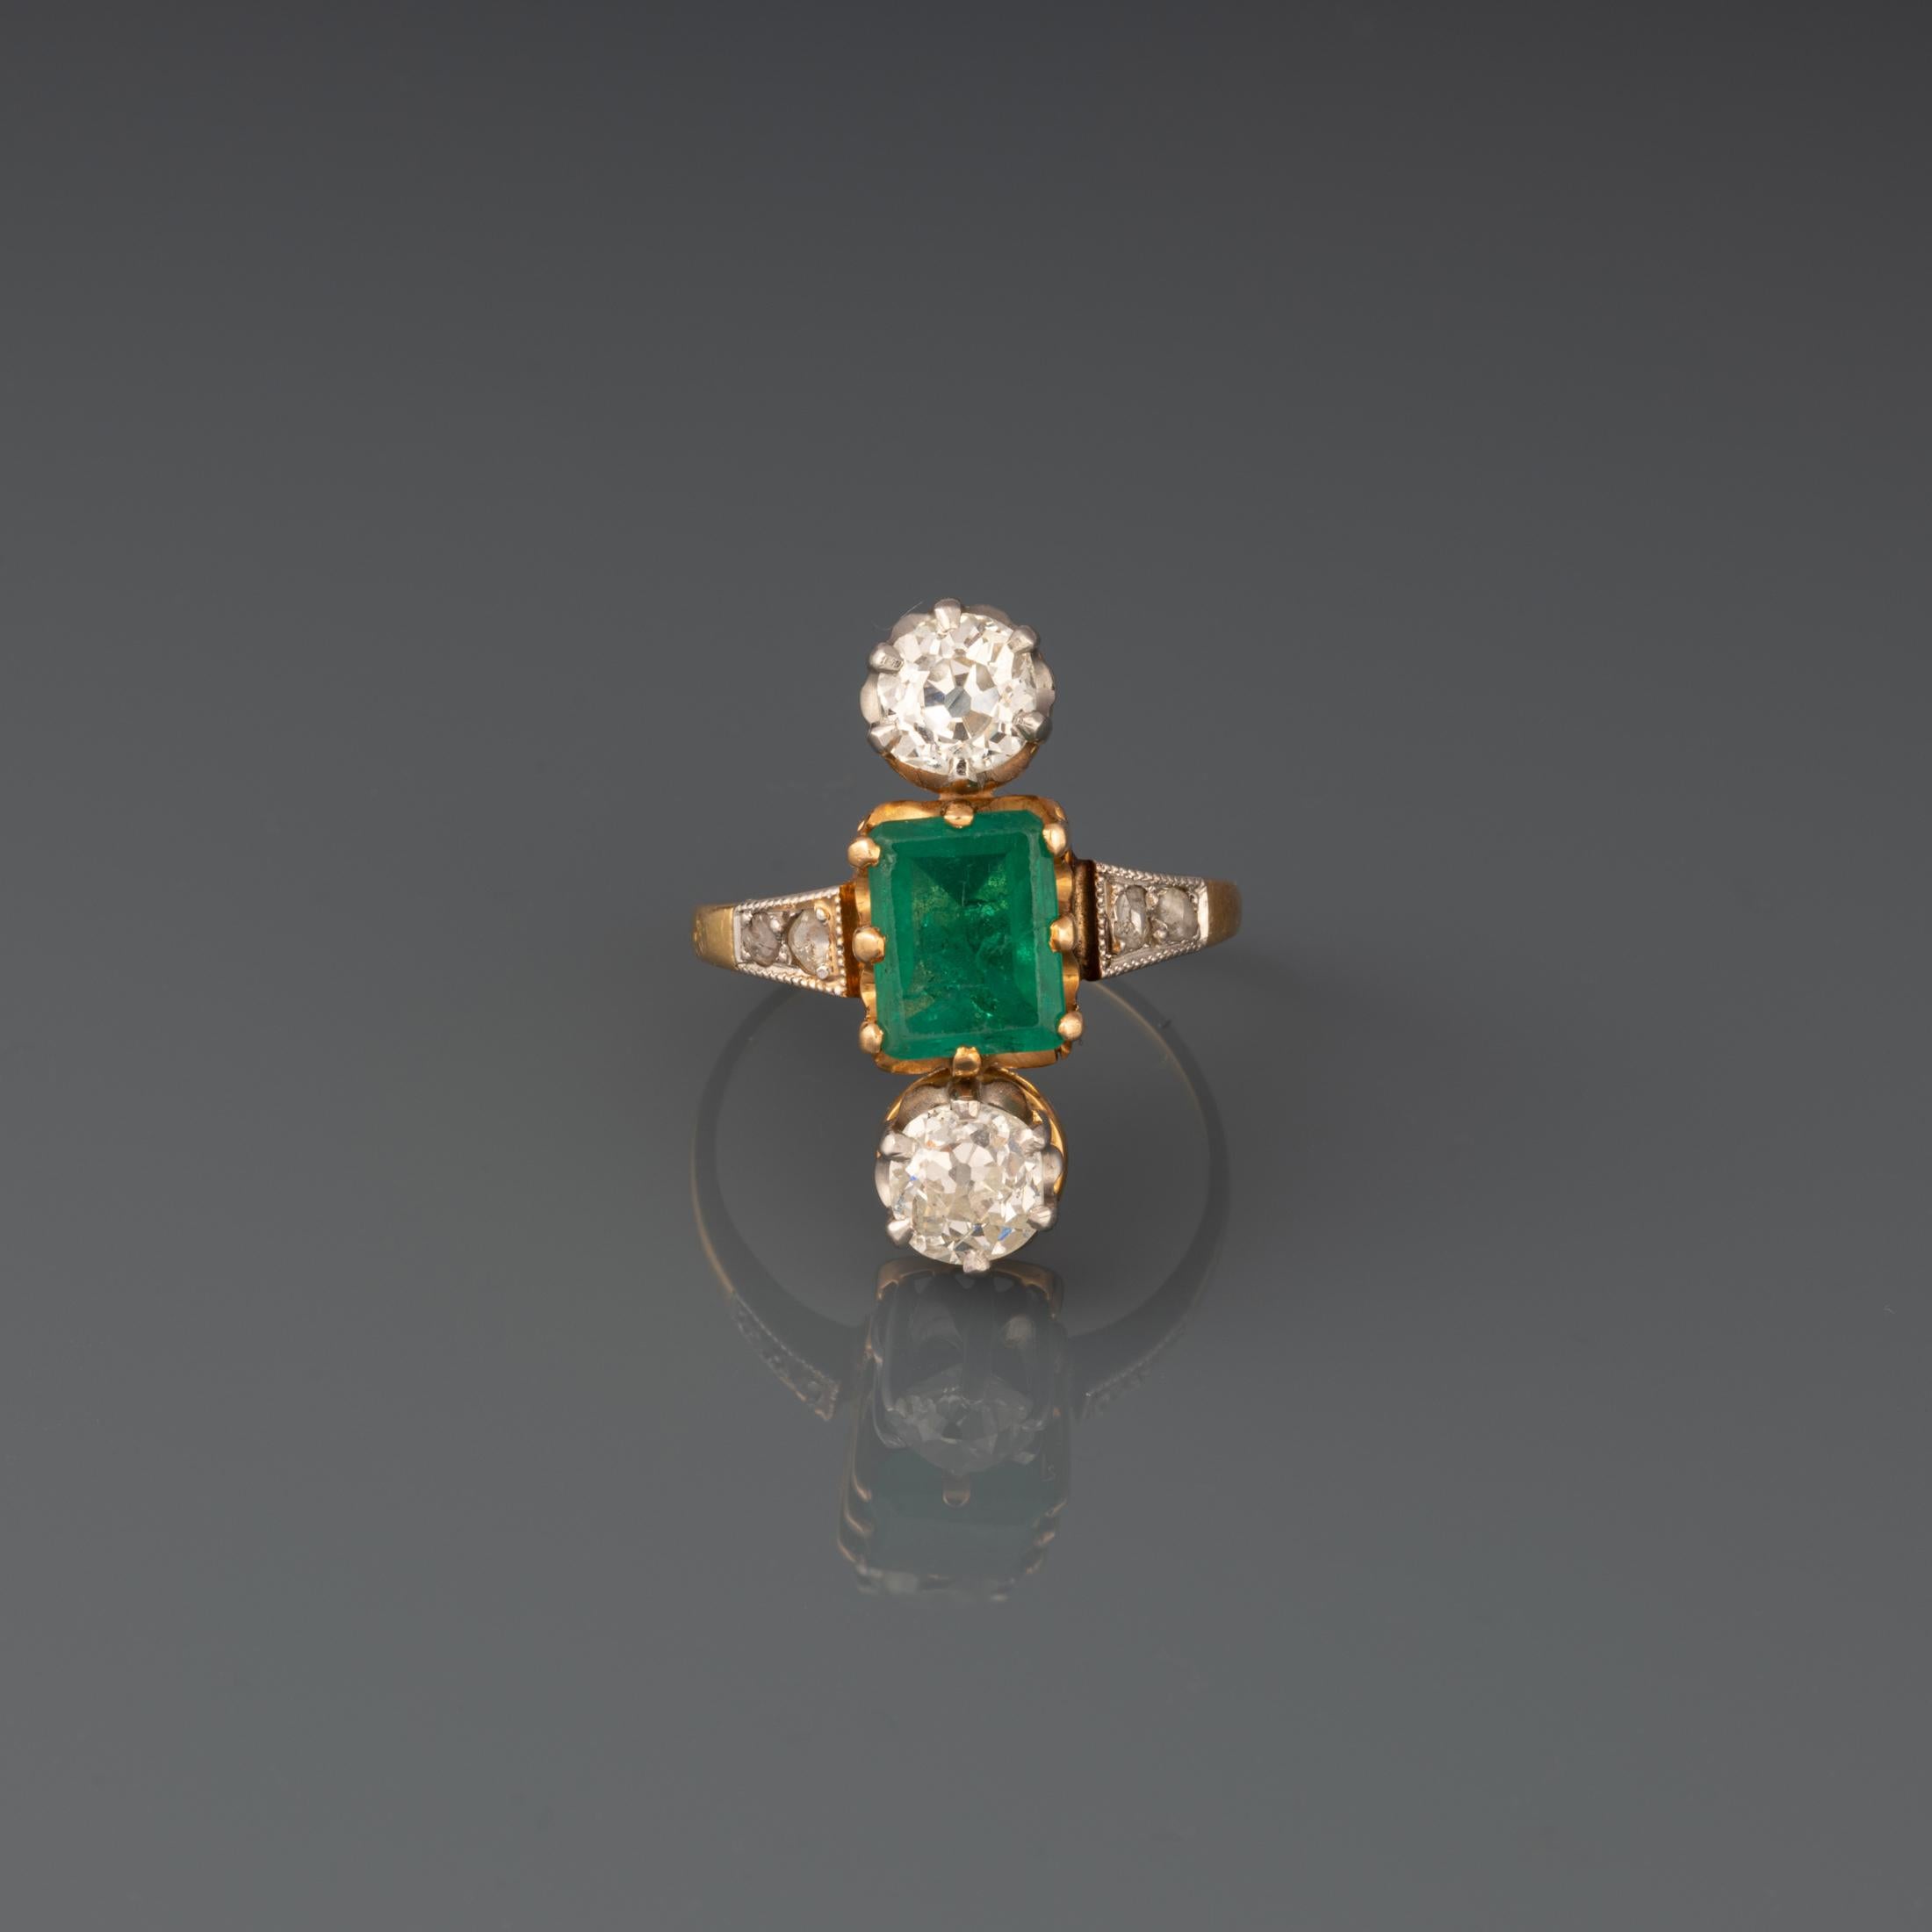 A lovely antique ring, made in France circa 1880.

Made in yellow and white gold 18k. Horse head hallmark.

The emerald weights 1.50 carats approximately, it has intense green color.

The diamonds weights 0.60 carats each approximately. They are